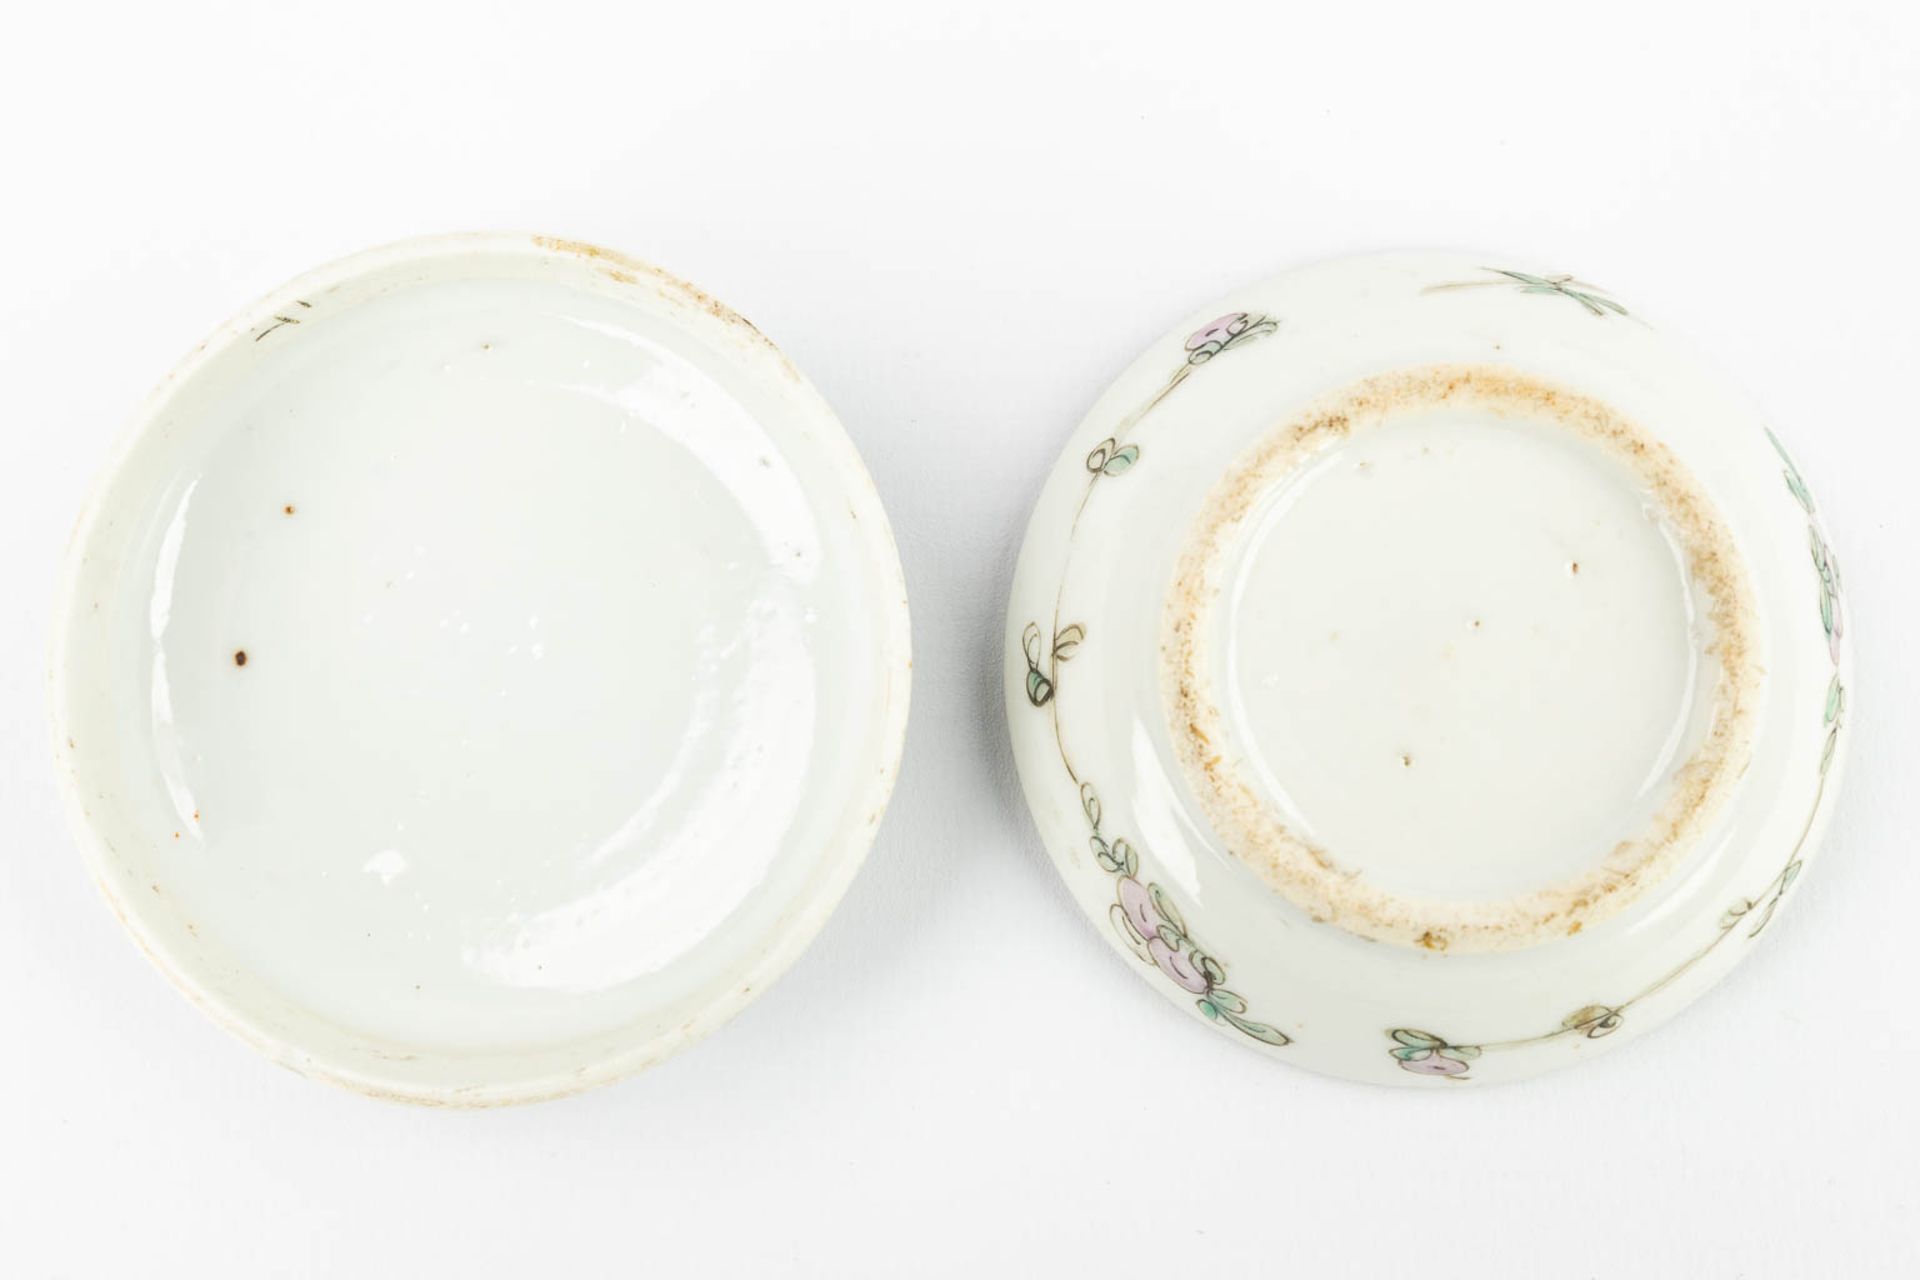 AÊset of 2 Chinese pots with lid, with hand-painted decor and made of porcelain (5 x 8,5 cm) - Image 4 of 18